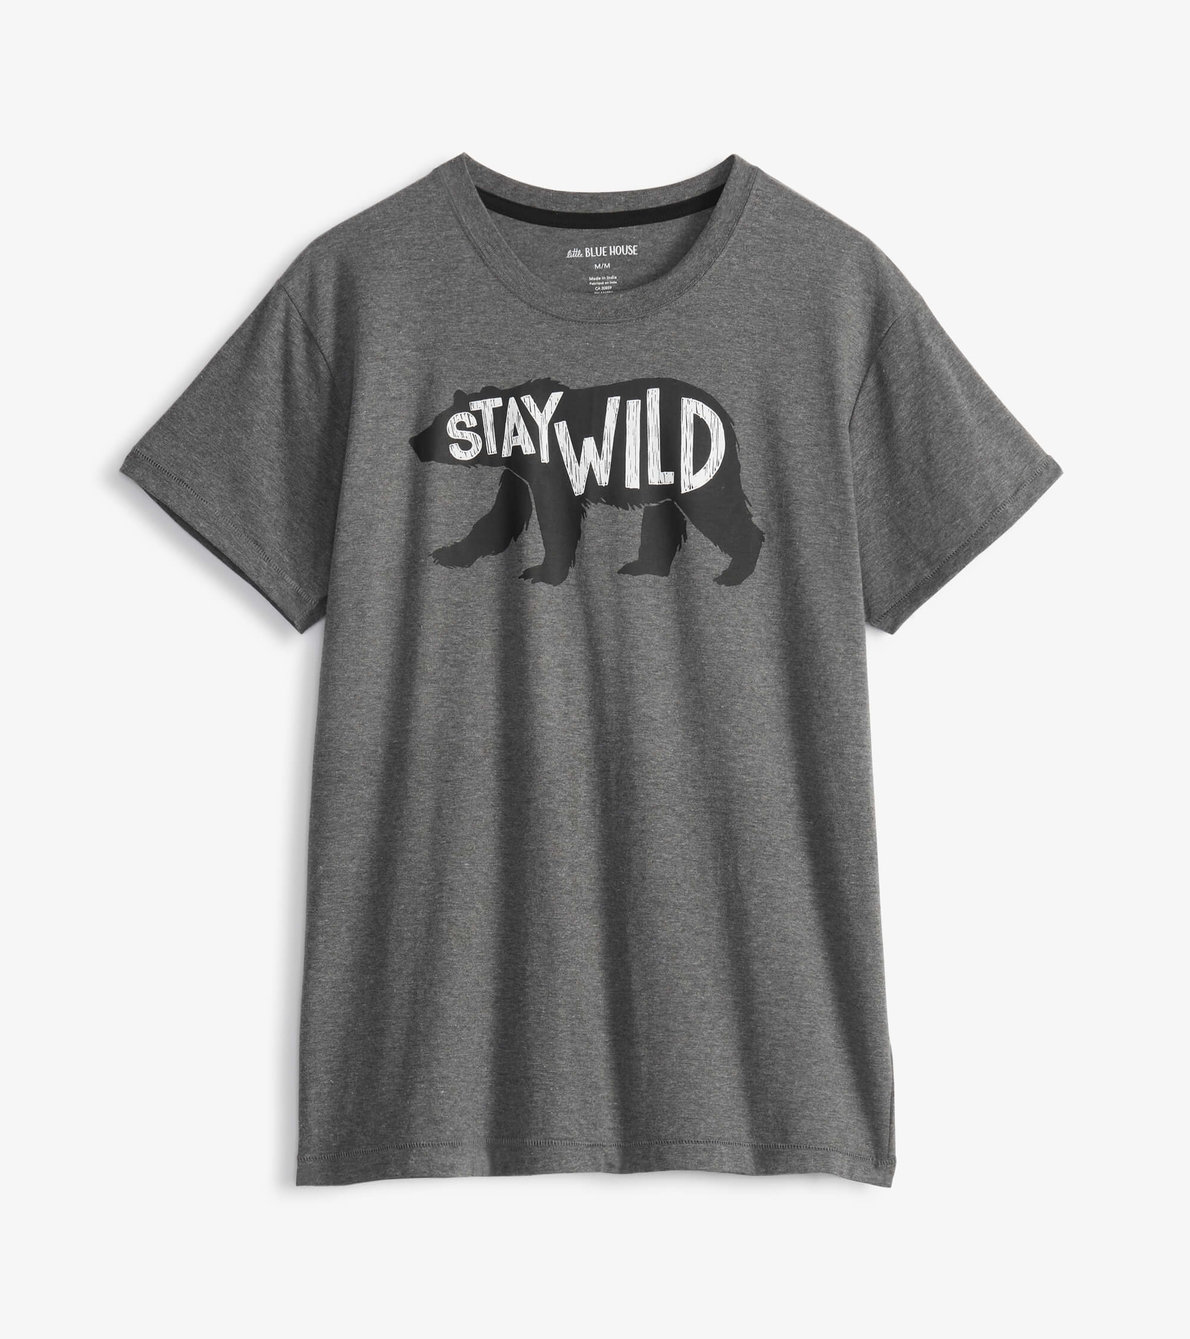 View larger image of Stay Wild Men's Tee